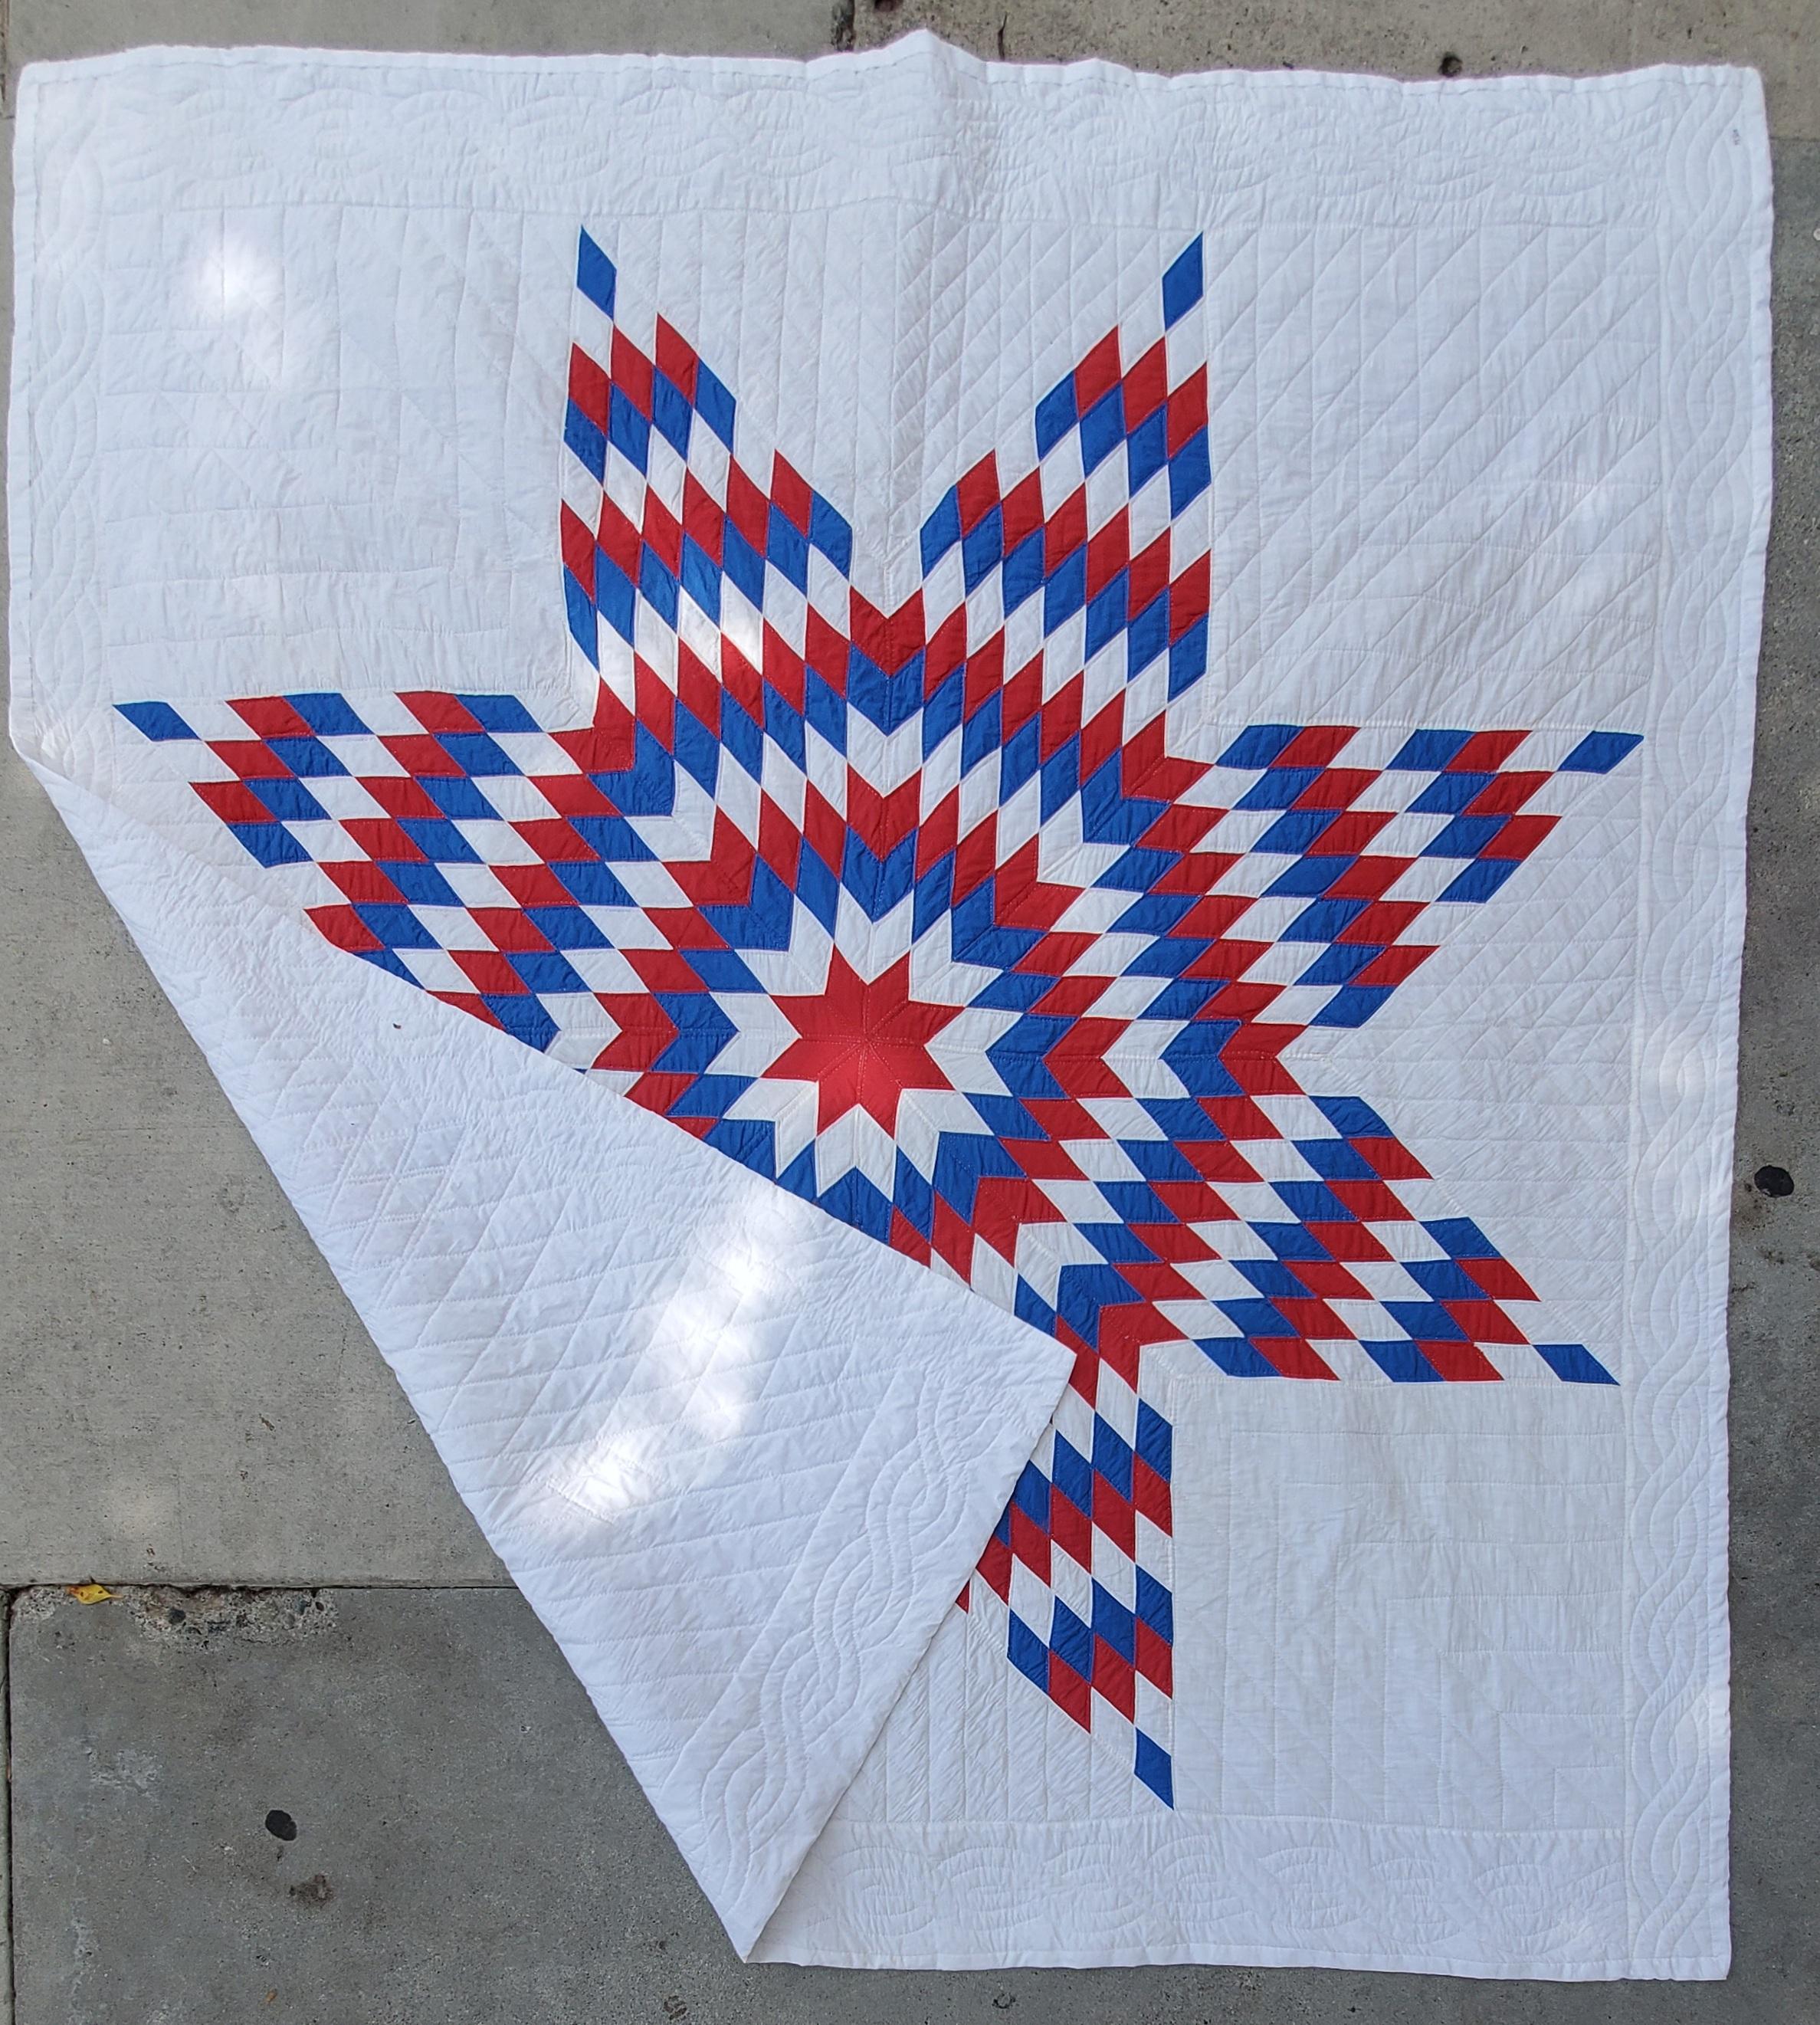 This wonderful and graphic red, white and blue patriotic quilt is in pristine condition. It was recently laundered and has very fine piecework and quilting.